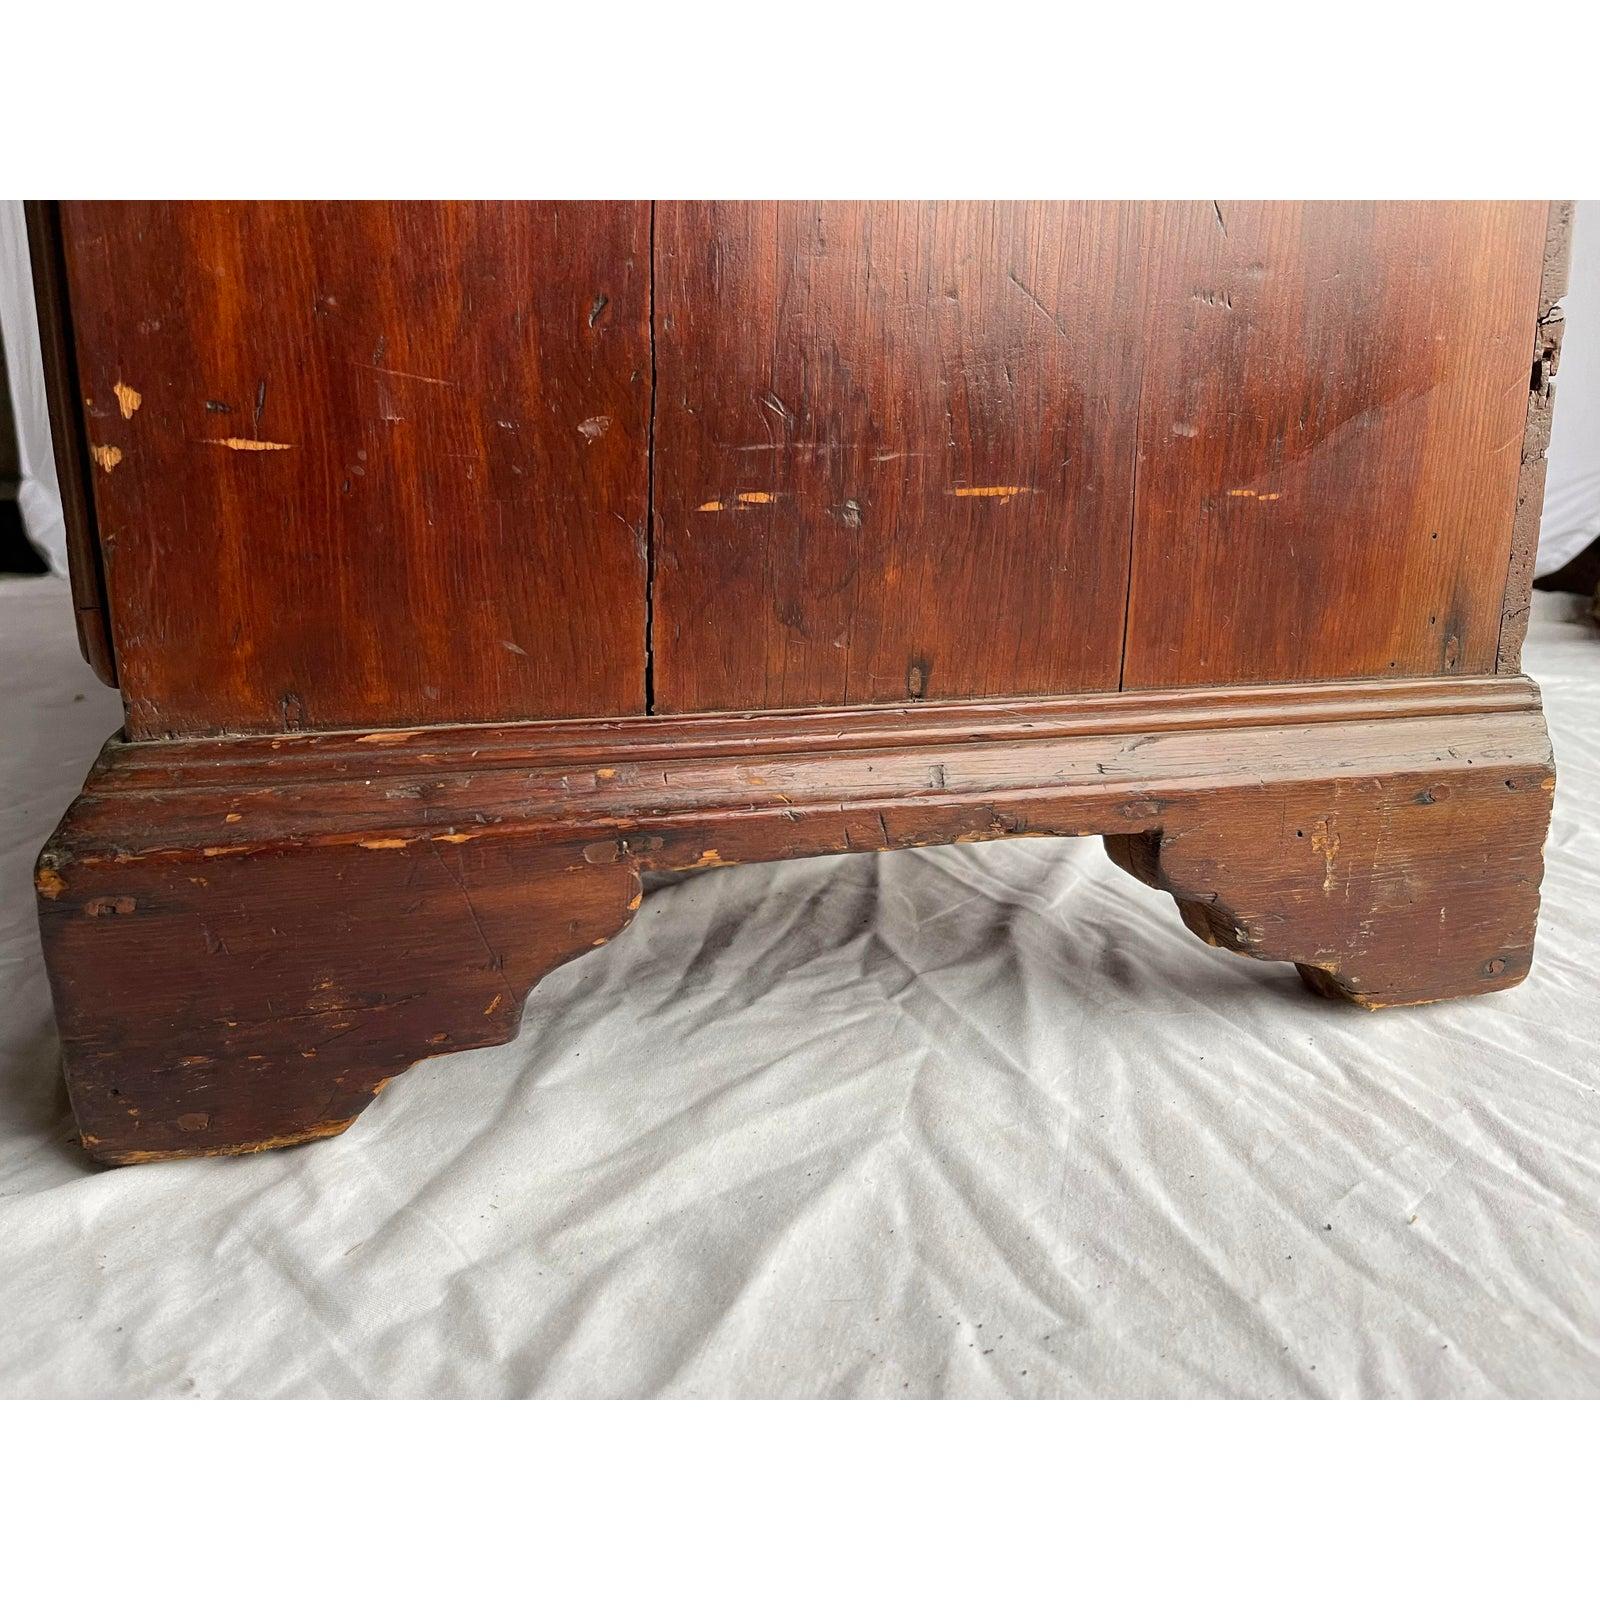 18th Century New England Country American Single Drawer Blanket Mule Chest In Good Condition For Sale In Forney, TX